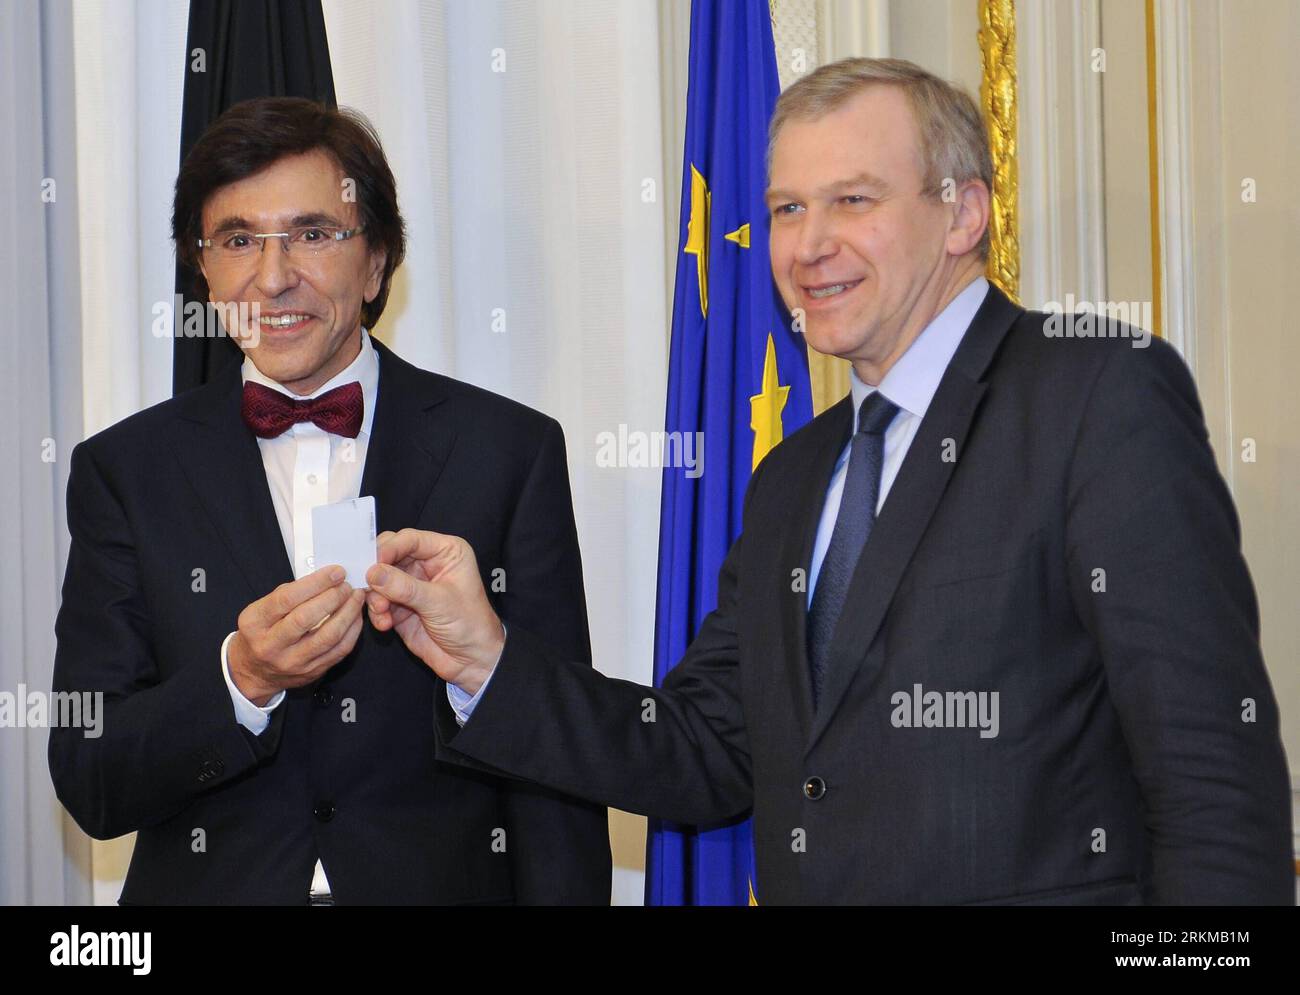 Bildnummer: 56651949  Datum: 06.12.2011  Copyright: imago/Xinhua (111206) -- BRUSSELS, Dec. 6, 2011 (Xinhua) -- Belgian new Prime Minister Elio Di Rupo (L) receives symbolic office card from outgoing Prime Minister Yves Leterme at the Prime Minister s residence in Brussels, capital of Belgium, Dec. 6, 2011. The inauguration of the new government marked the ending of a record 18-months long political deadlock of Belgium. (Xinhua/Ye Pingfan) (ypf) BELGIUM-BRUSSELS-NEW GOVERNMENT PUBLICATIONxNOTxINxCHN People Politik neue Regierung Belgien x0x xtm 2011 quer premiumd      56651949 Date 06 12 2011 Stock Photo